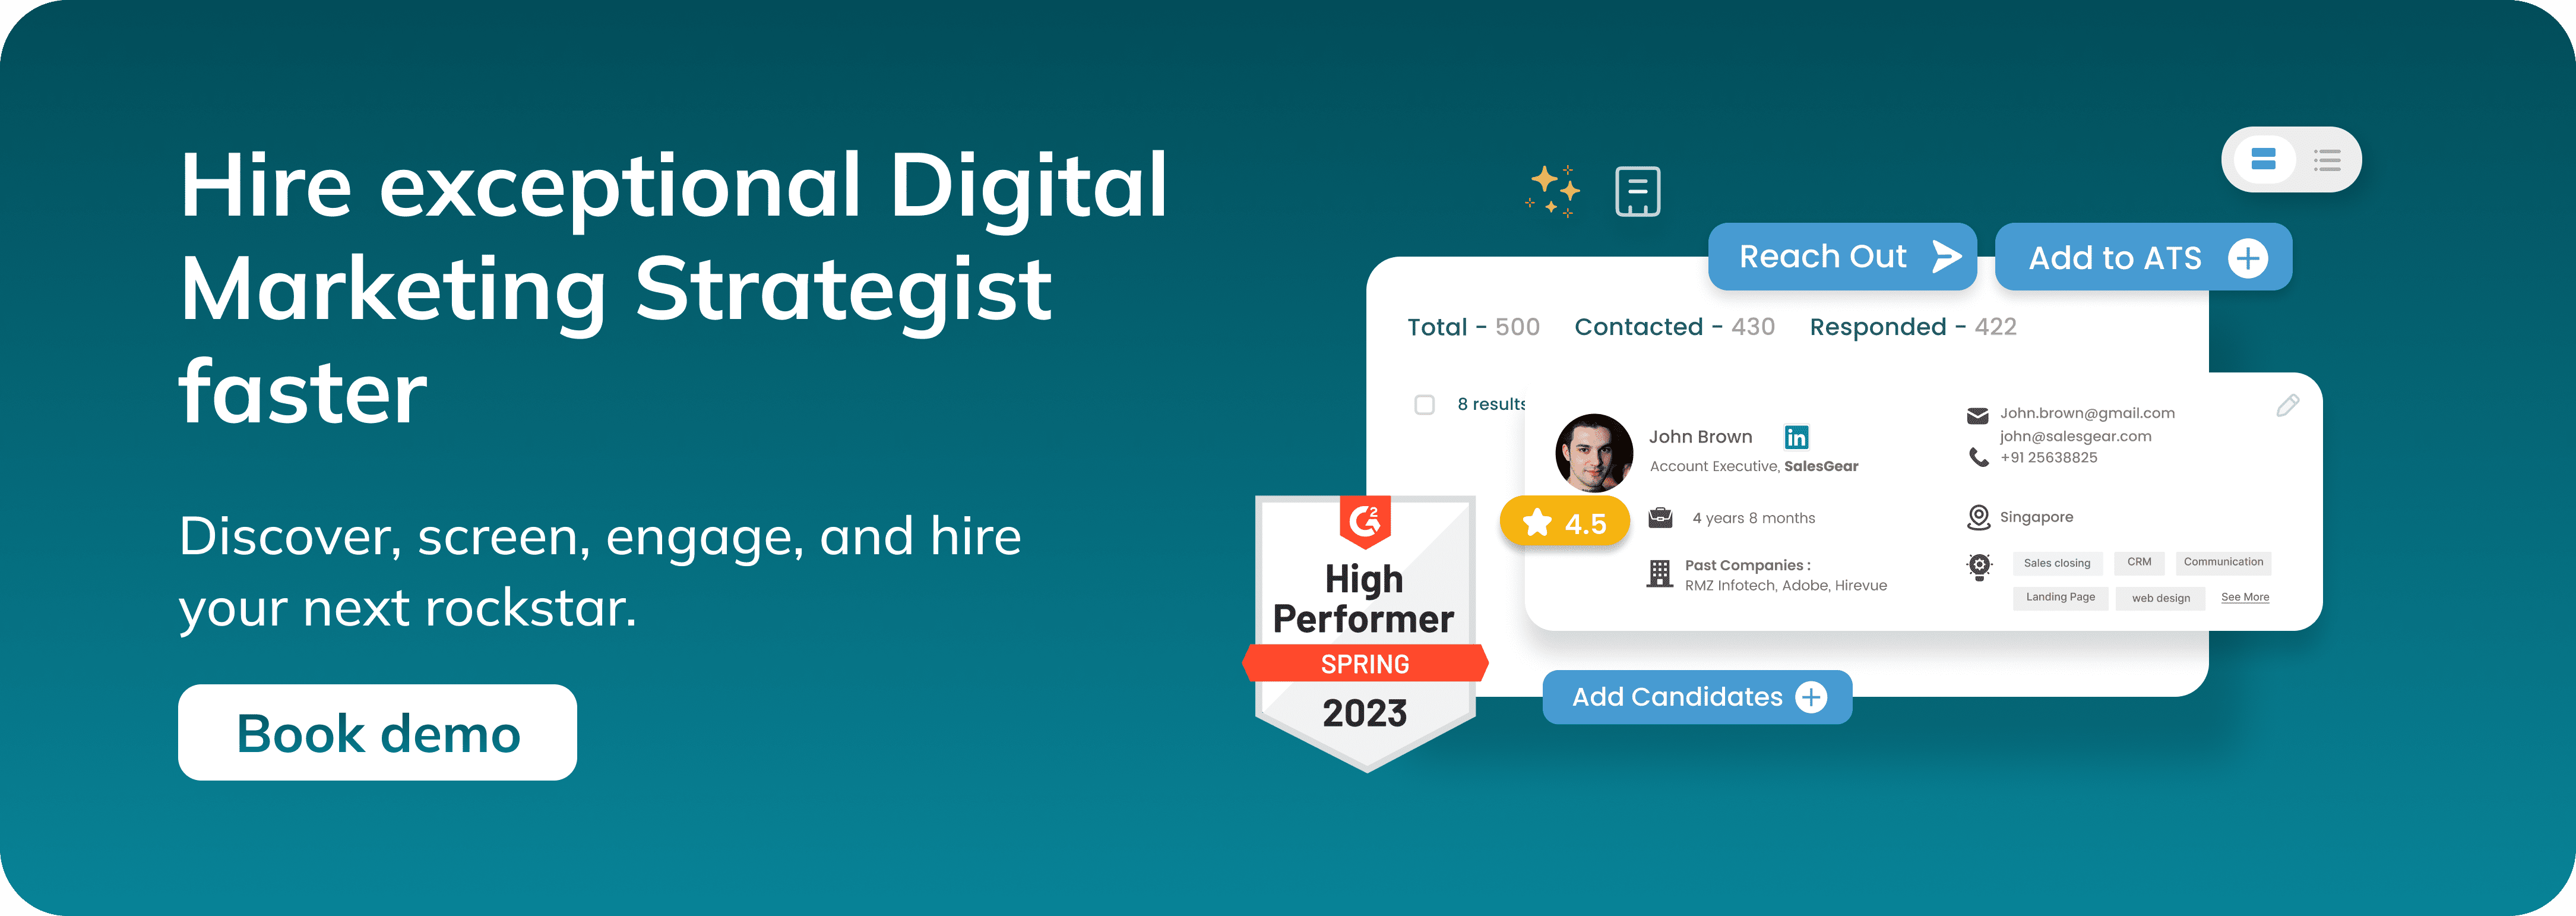 How to hire the perfect Digital Marketing Strategist.png